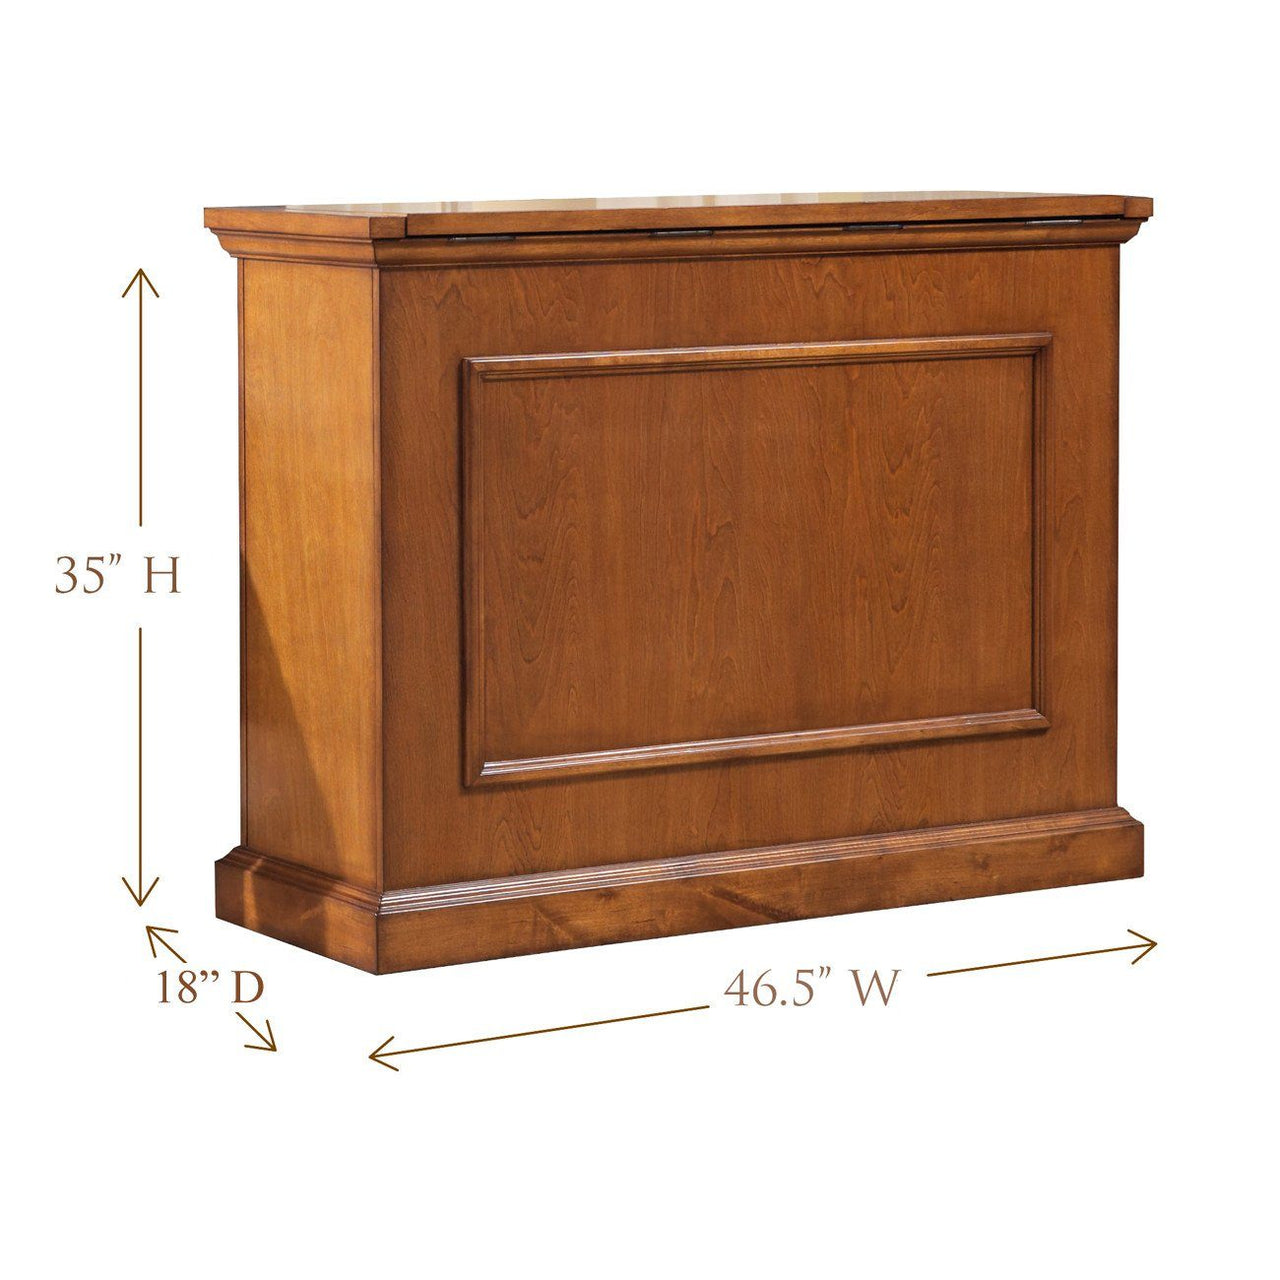 Touchstone Elevate - Oak Tv Lift Cabinets For Up To 42” Flat Screen Tv’S Tv Lift Cabinets Touchstone 